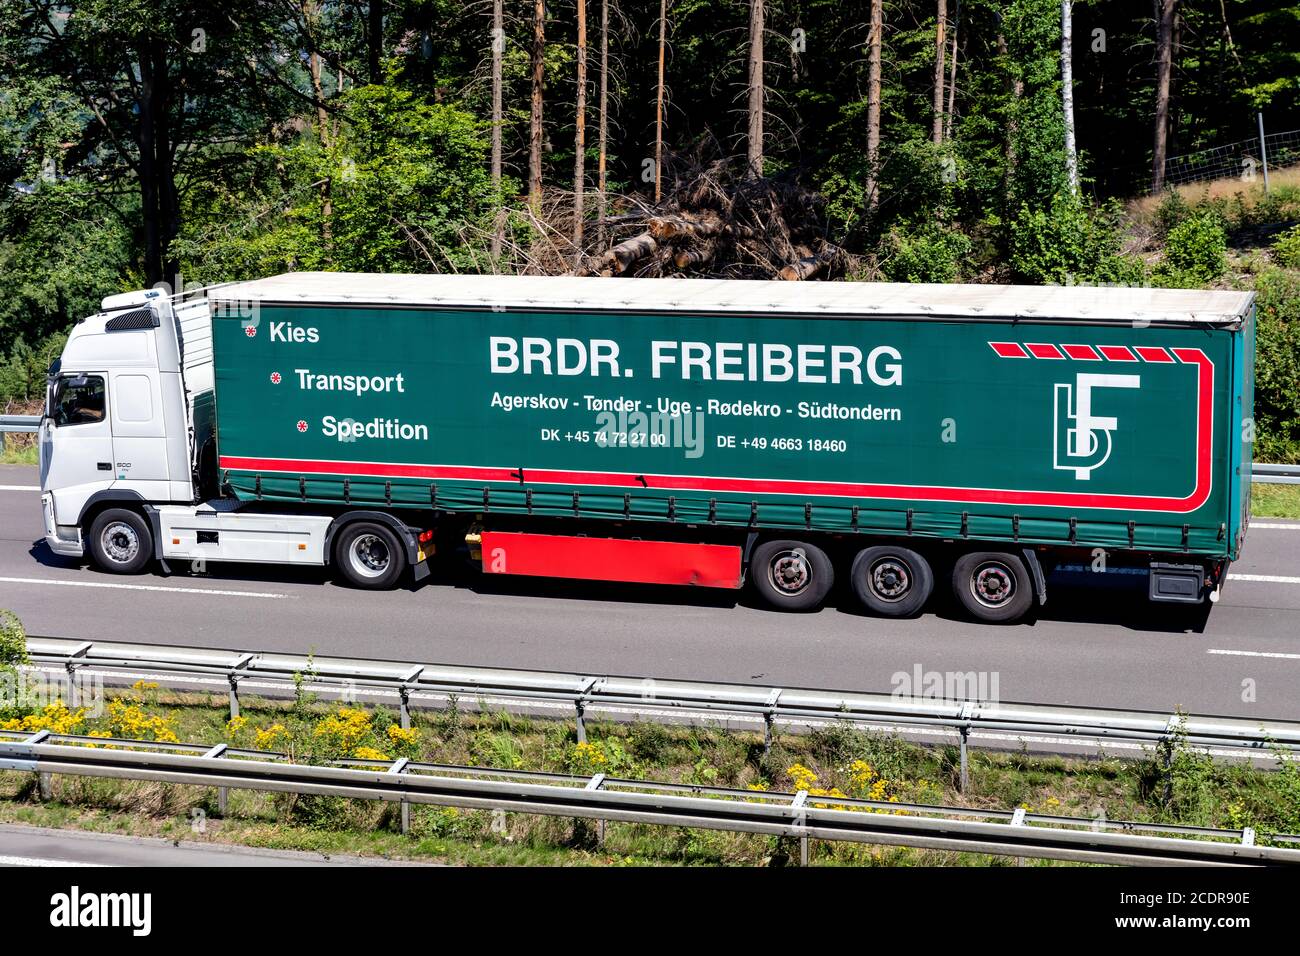 Freiberg Resolution Stock and Images - Alamy